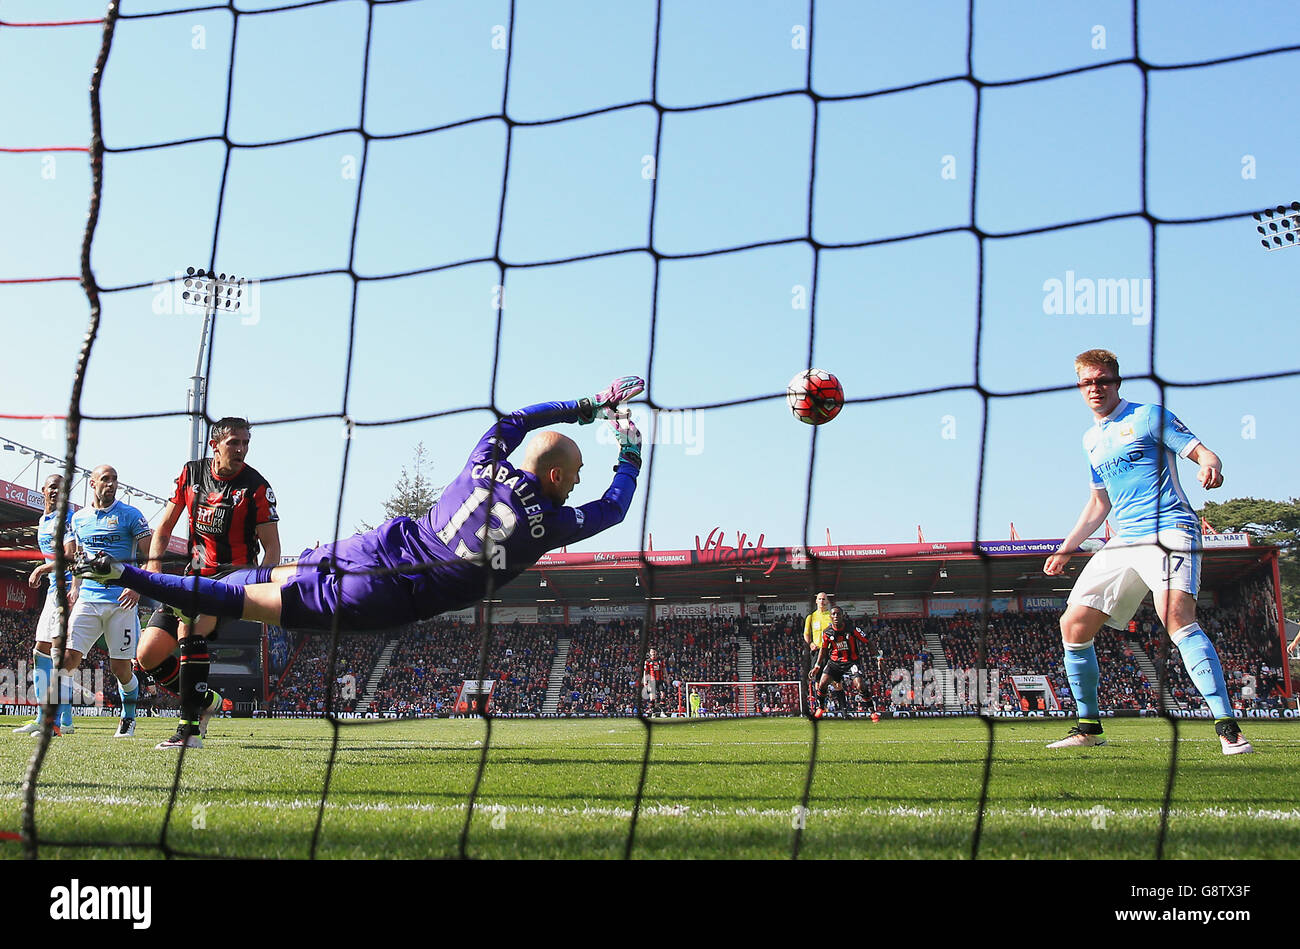 AFC Bournemouth v Manchester City - Barclays Premier League - Vitality Stadium. Manchester City goalkeeper Willy Caballero makes a save during the Barclays Premier League match at the Vitality Stadium, Bournemouth. Stock Photo